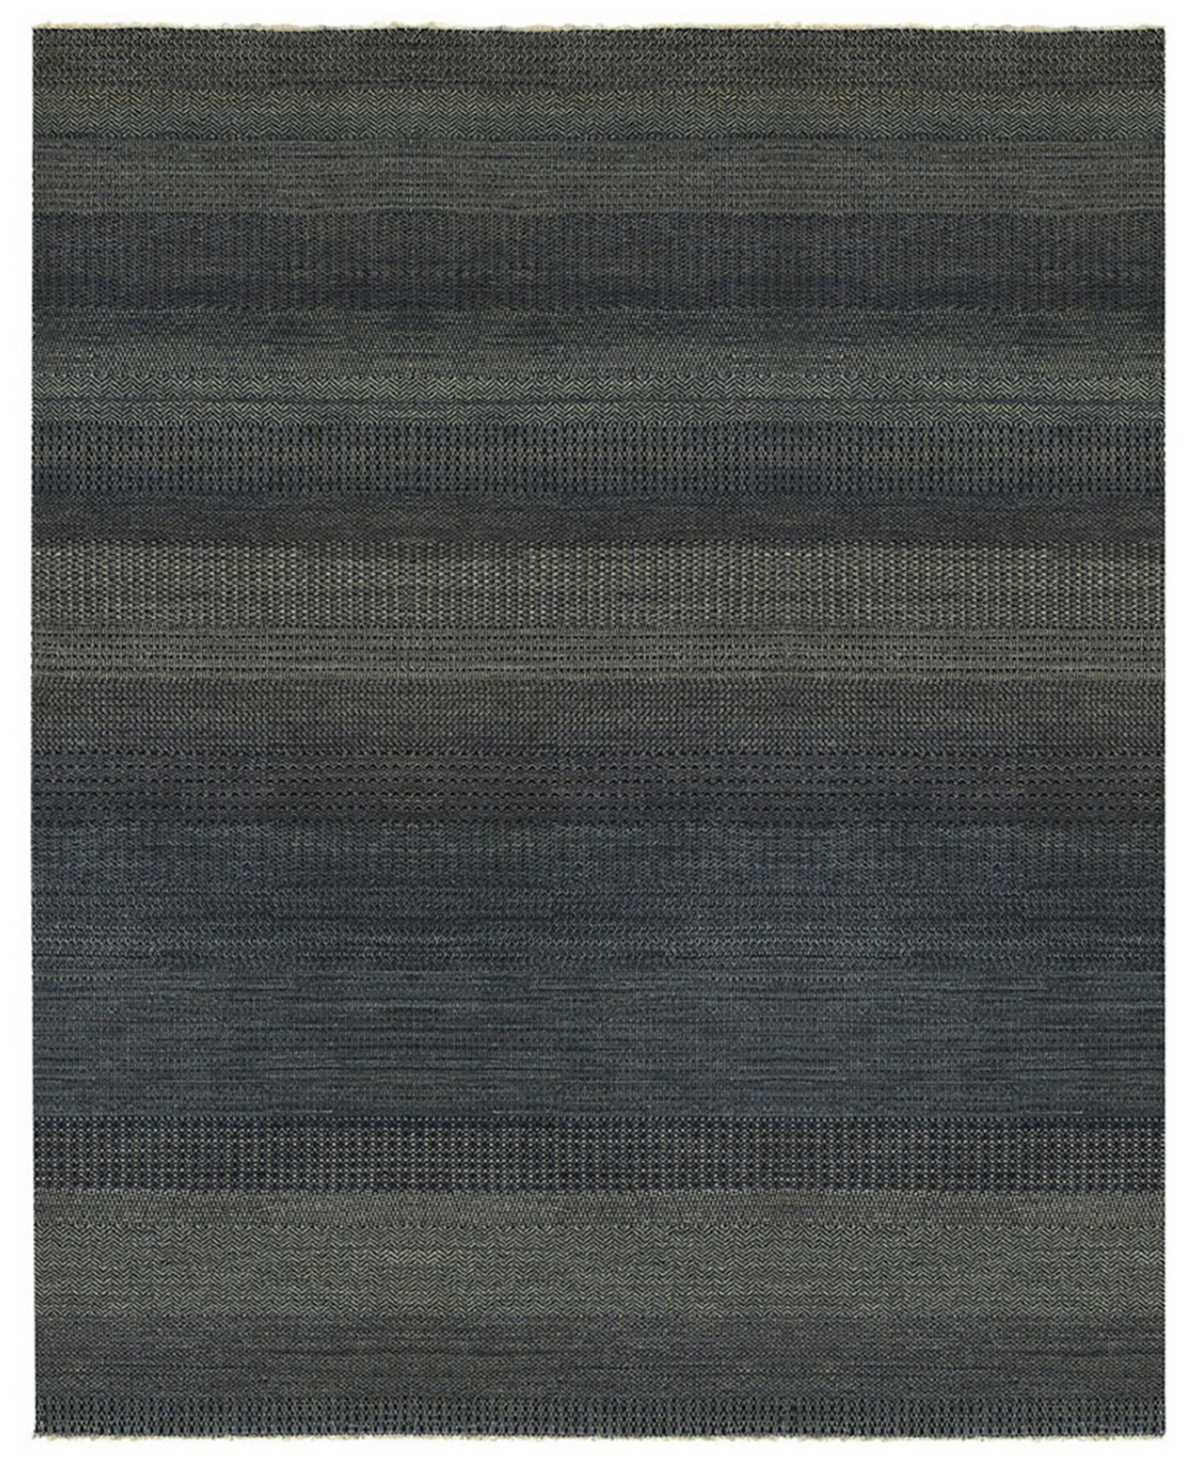 Capel Barrister 475 8' x 10' Area Rug - Midnight